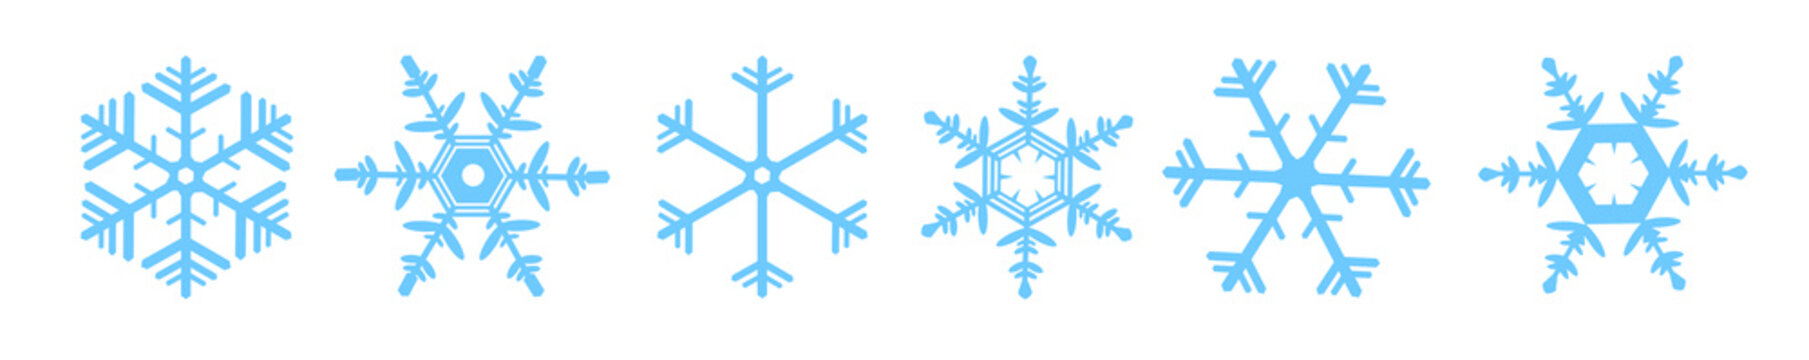 Set of blue Snowflakes icons in row. Snowflakes template. Snowflake vector icon.